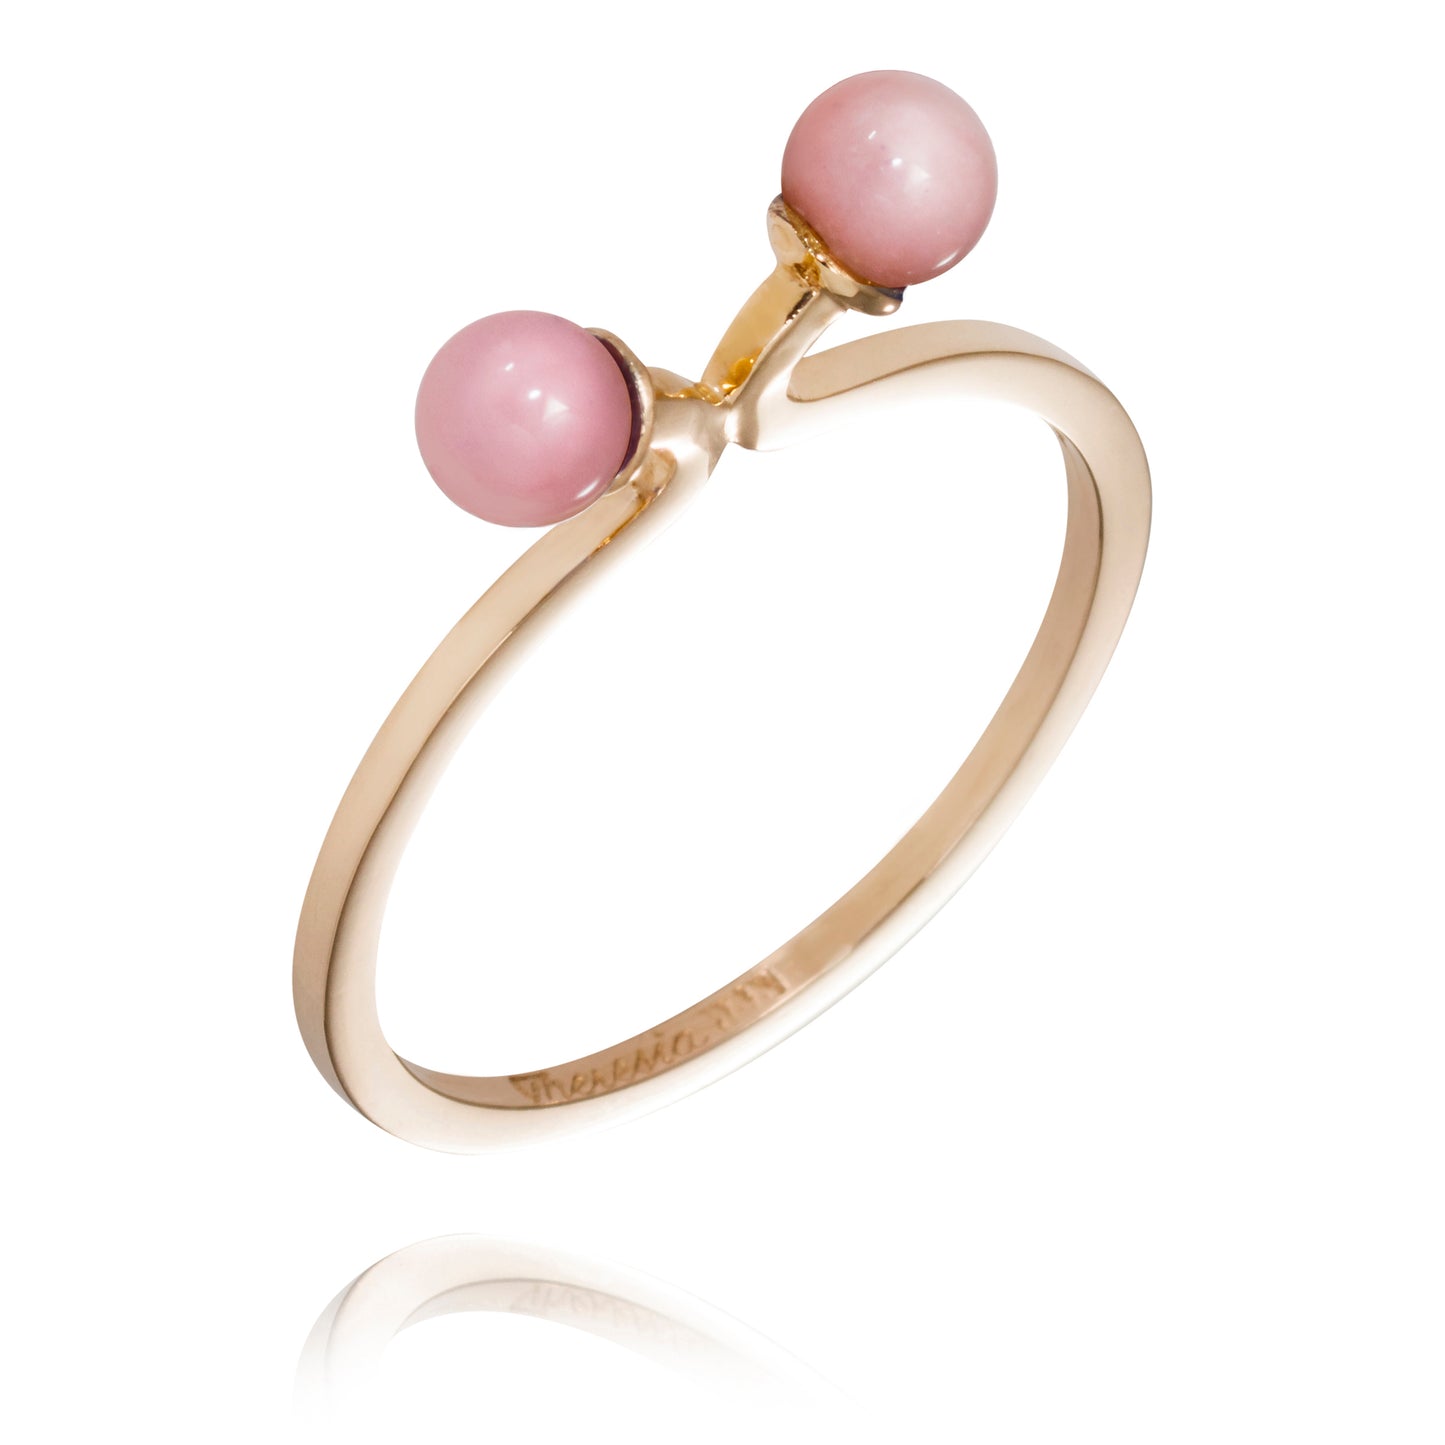 Tale about the ring 2 rings in gold, 1 white brilliants Twvvs 0.30ct 1 white pink pearl 1 pink opal 1 brilliant cut pink sapphires